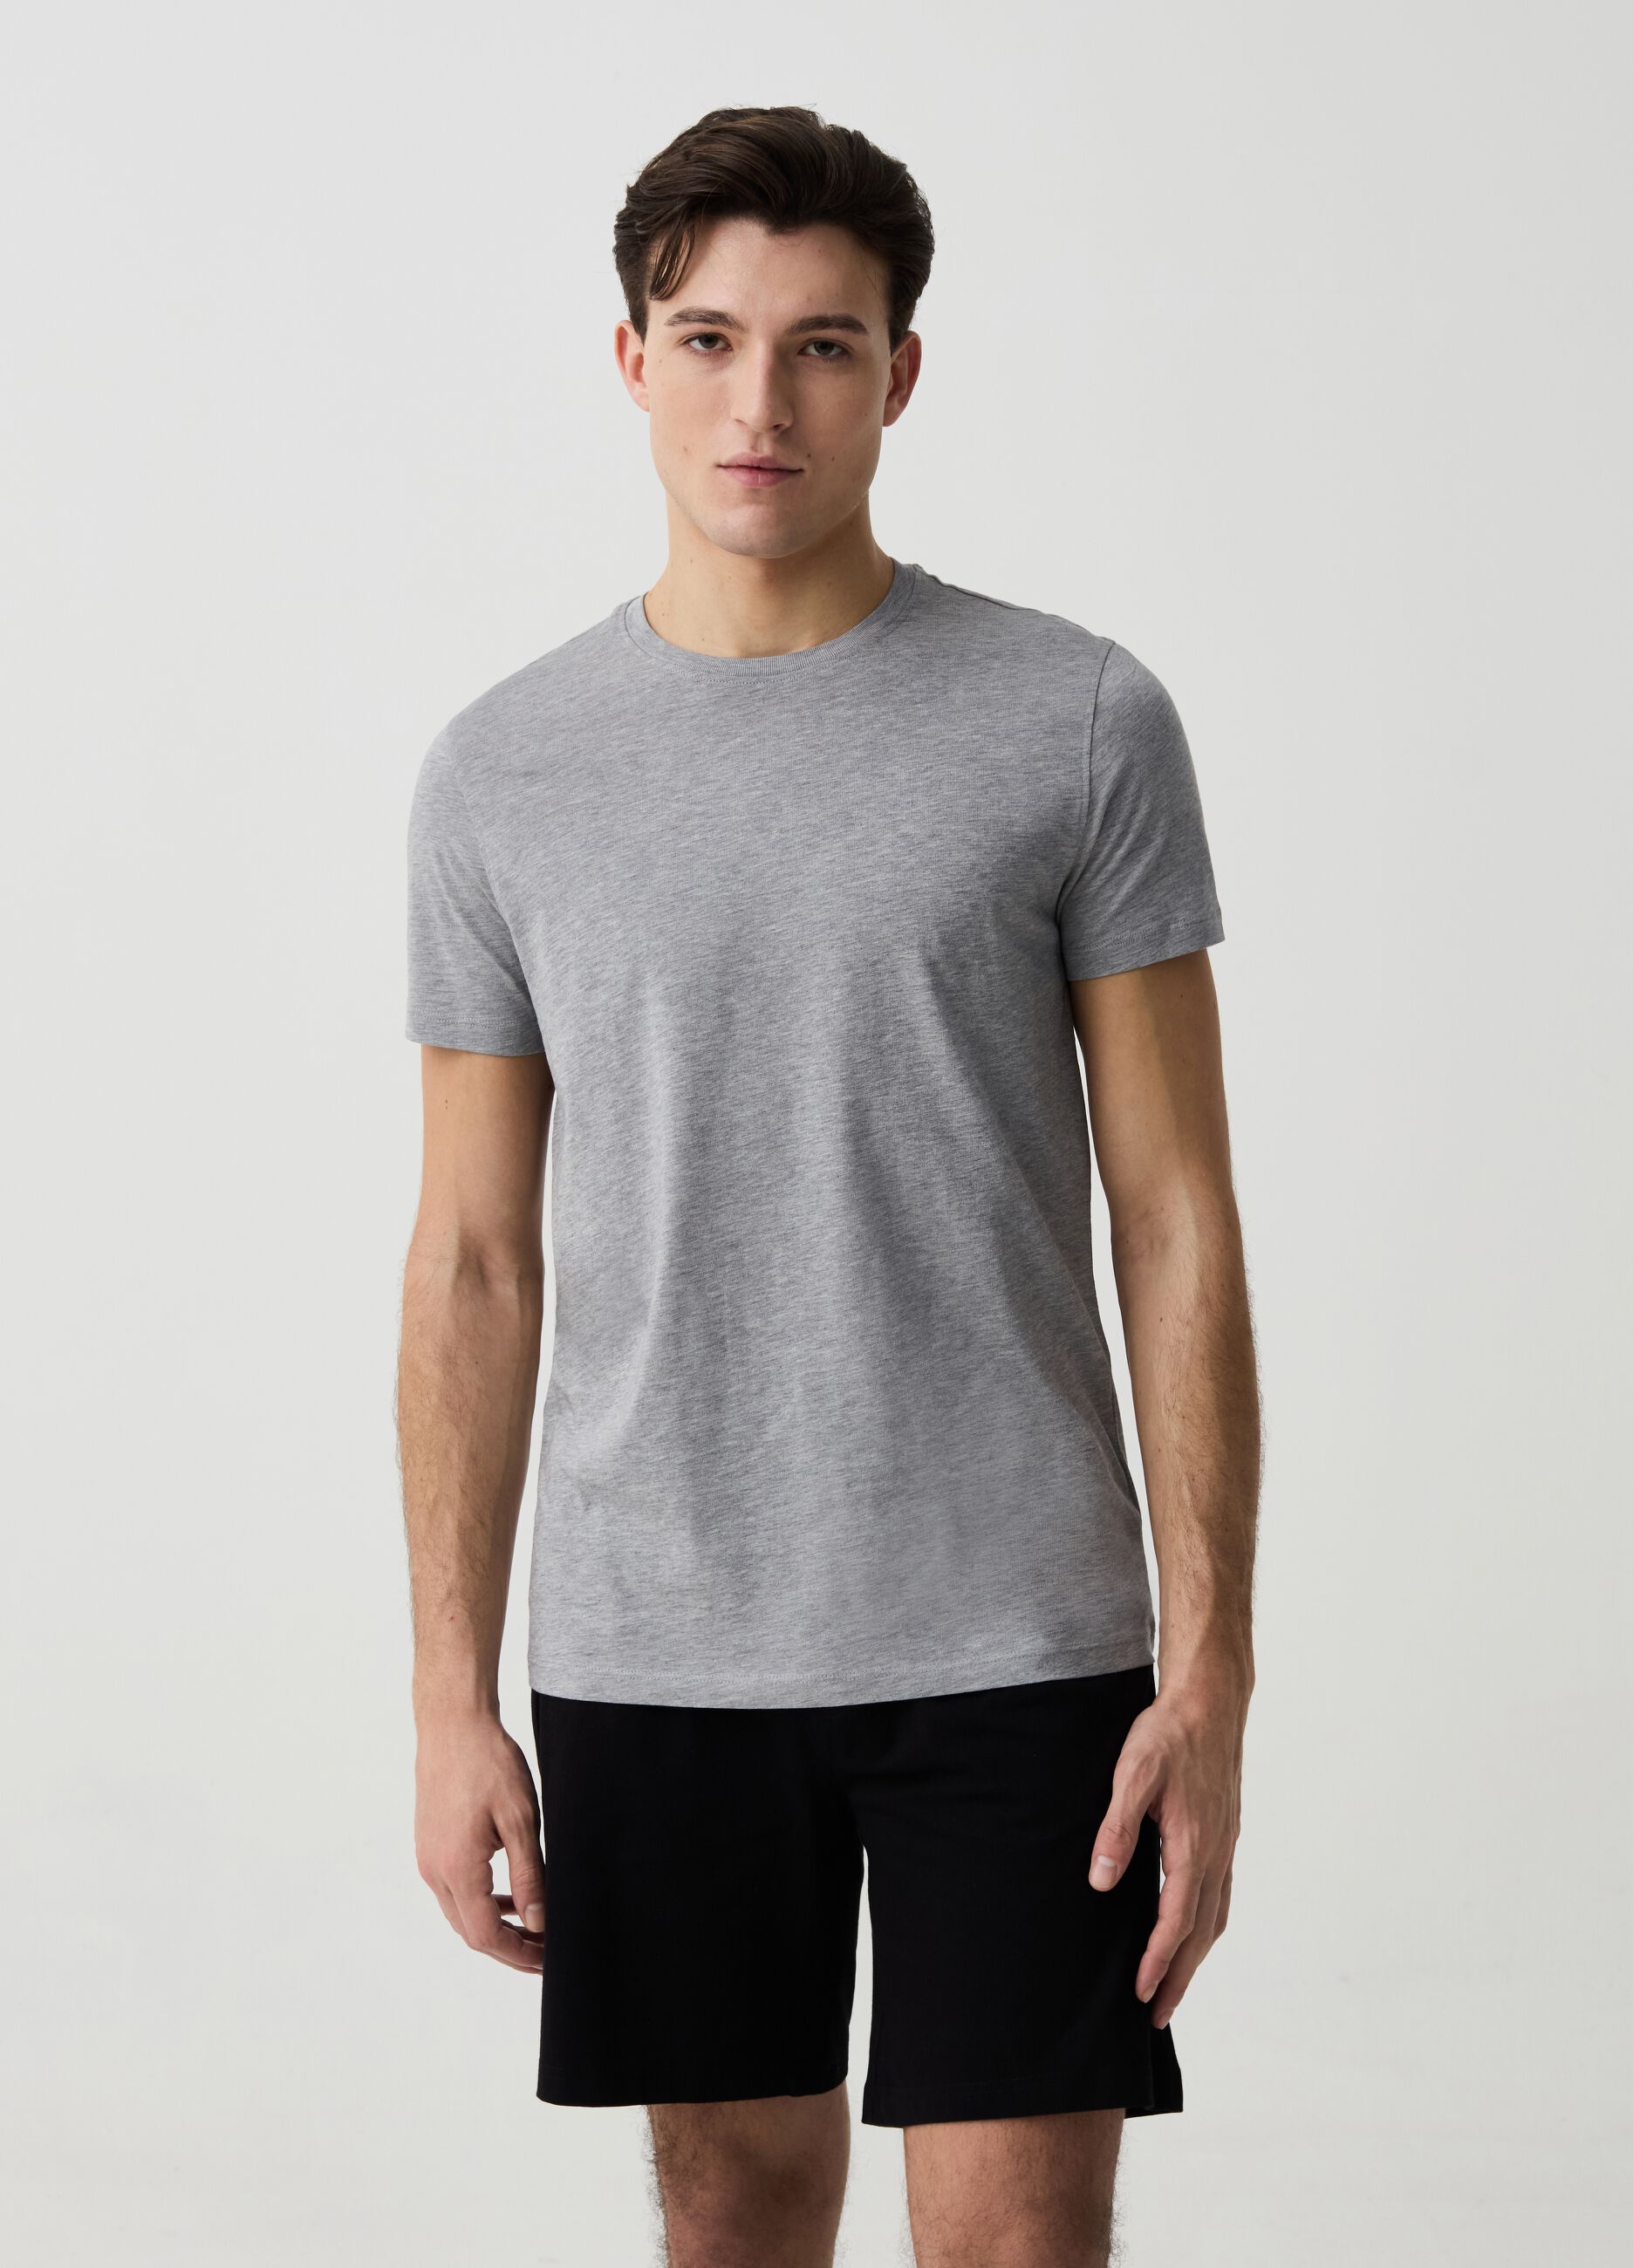 Bipack t-shirt intime in cotone Supima